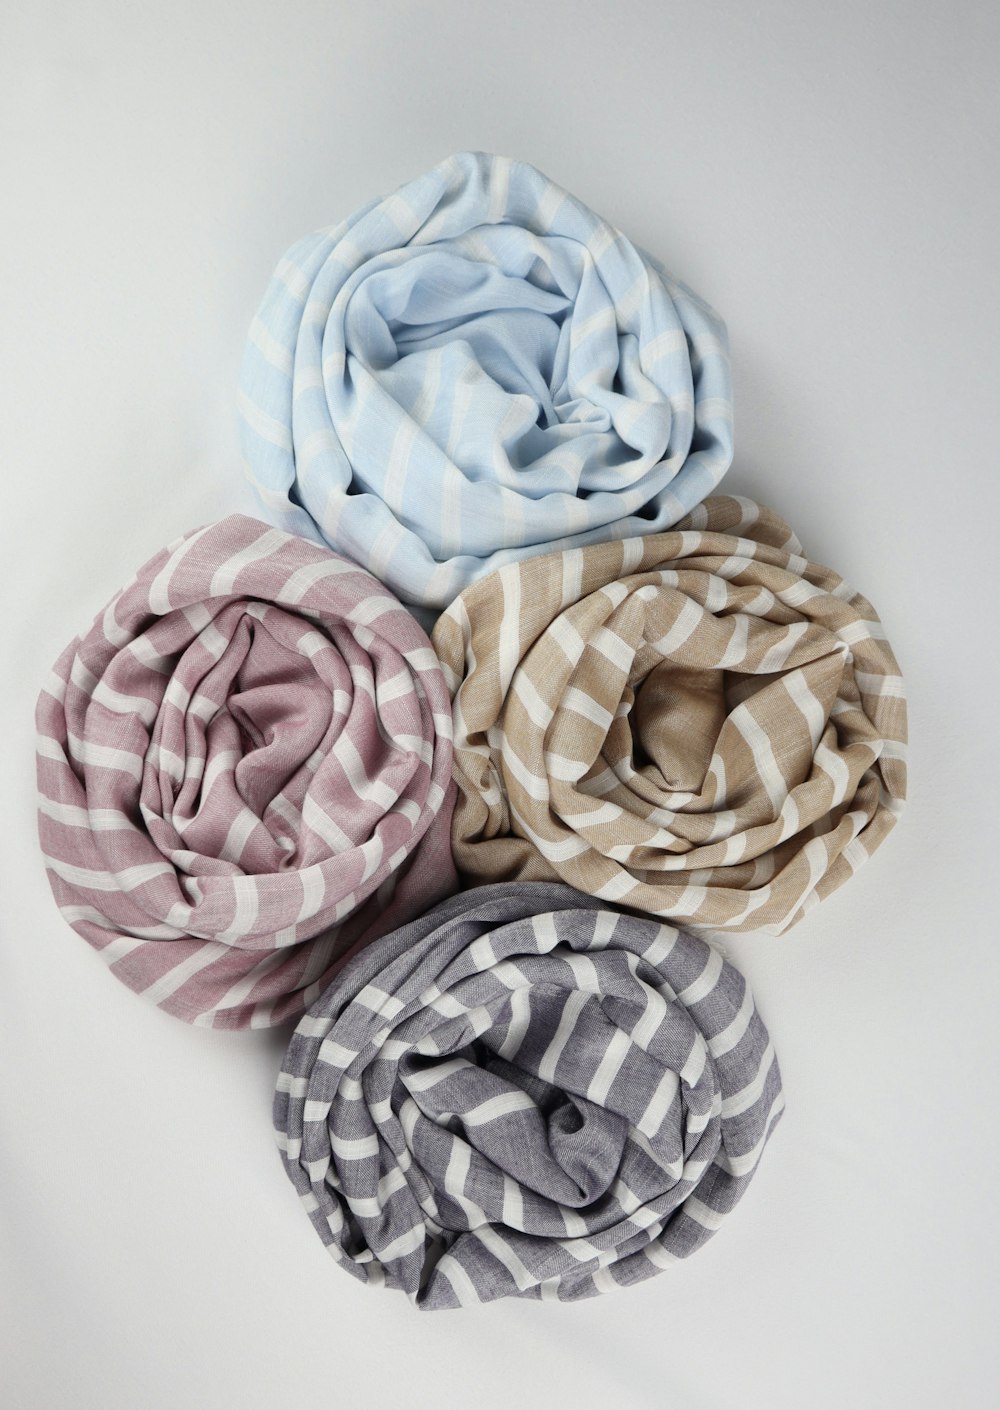 four scarves of different colors on a white surface